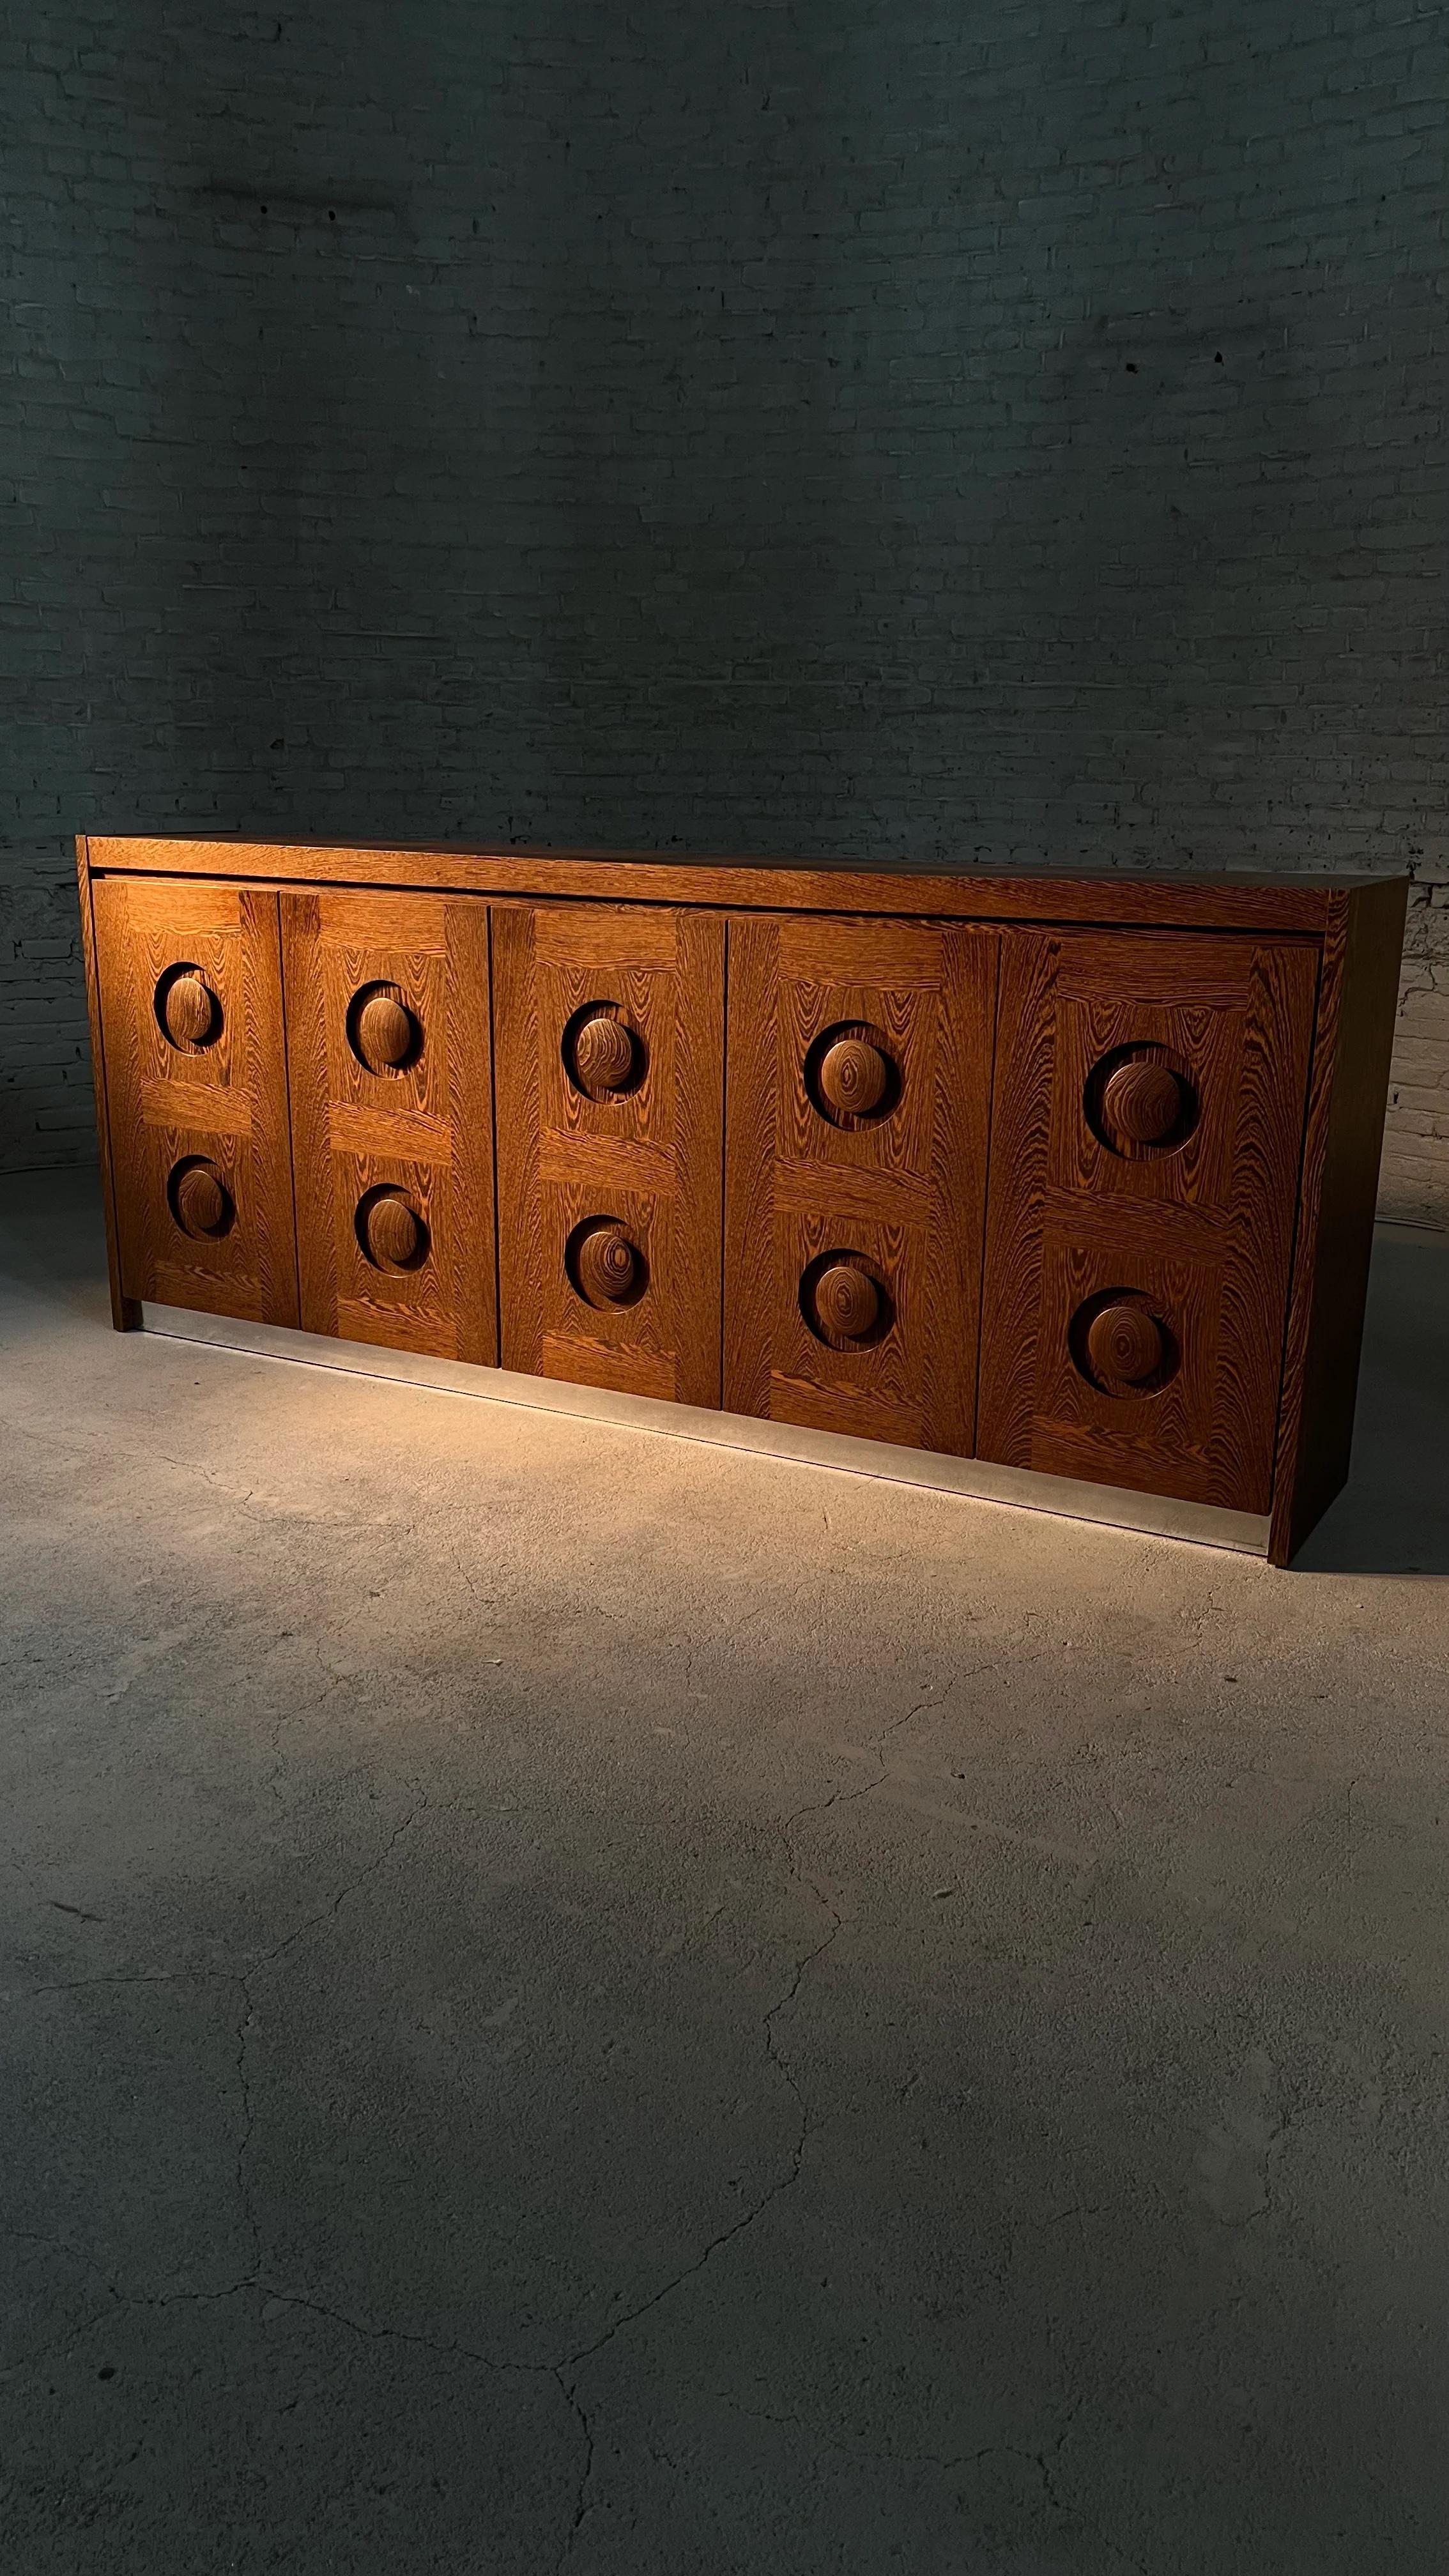 Extremely rare brutalist cabinet in Wengé wood. This large vintage highboard has 5 graphical doors with handles in beautiful solid Wengè. This cabinet were made in the 80s, attributed to the famous manufacturer and designer De Coene Fréres, meaning